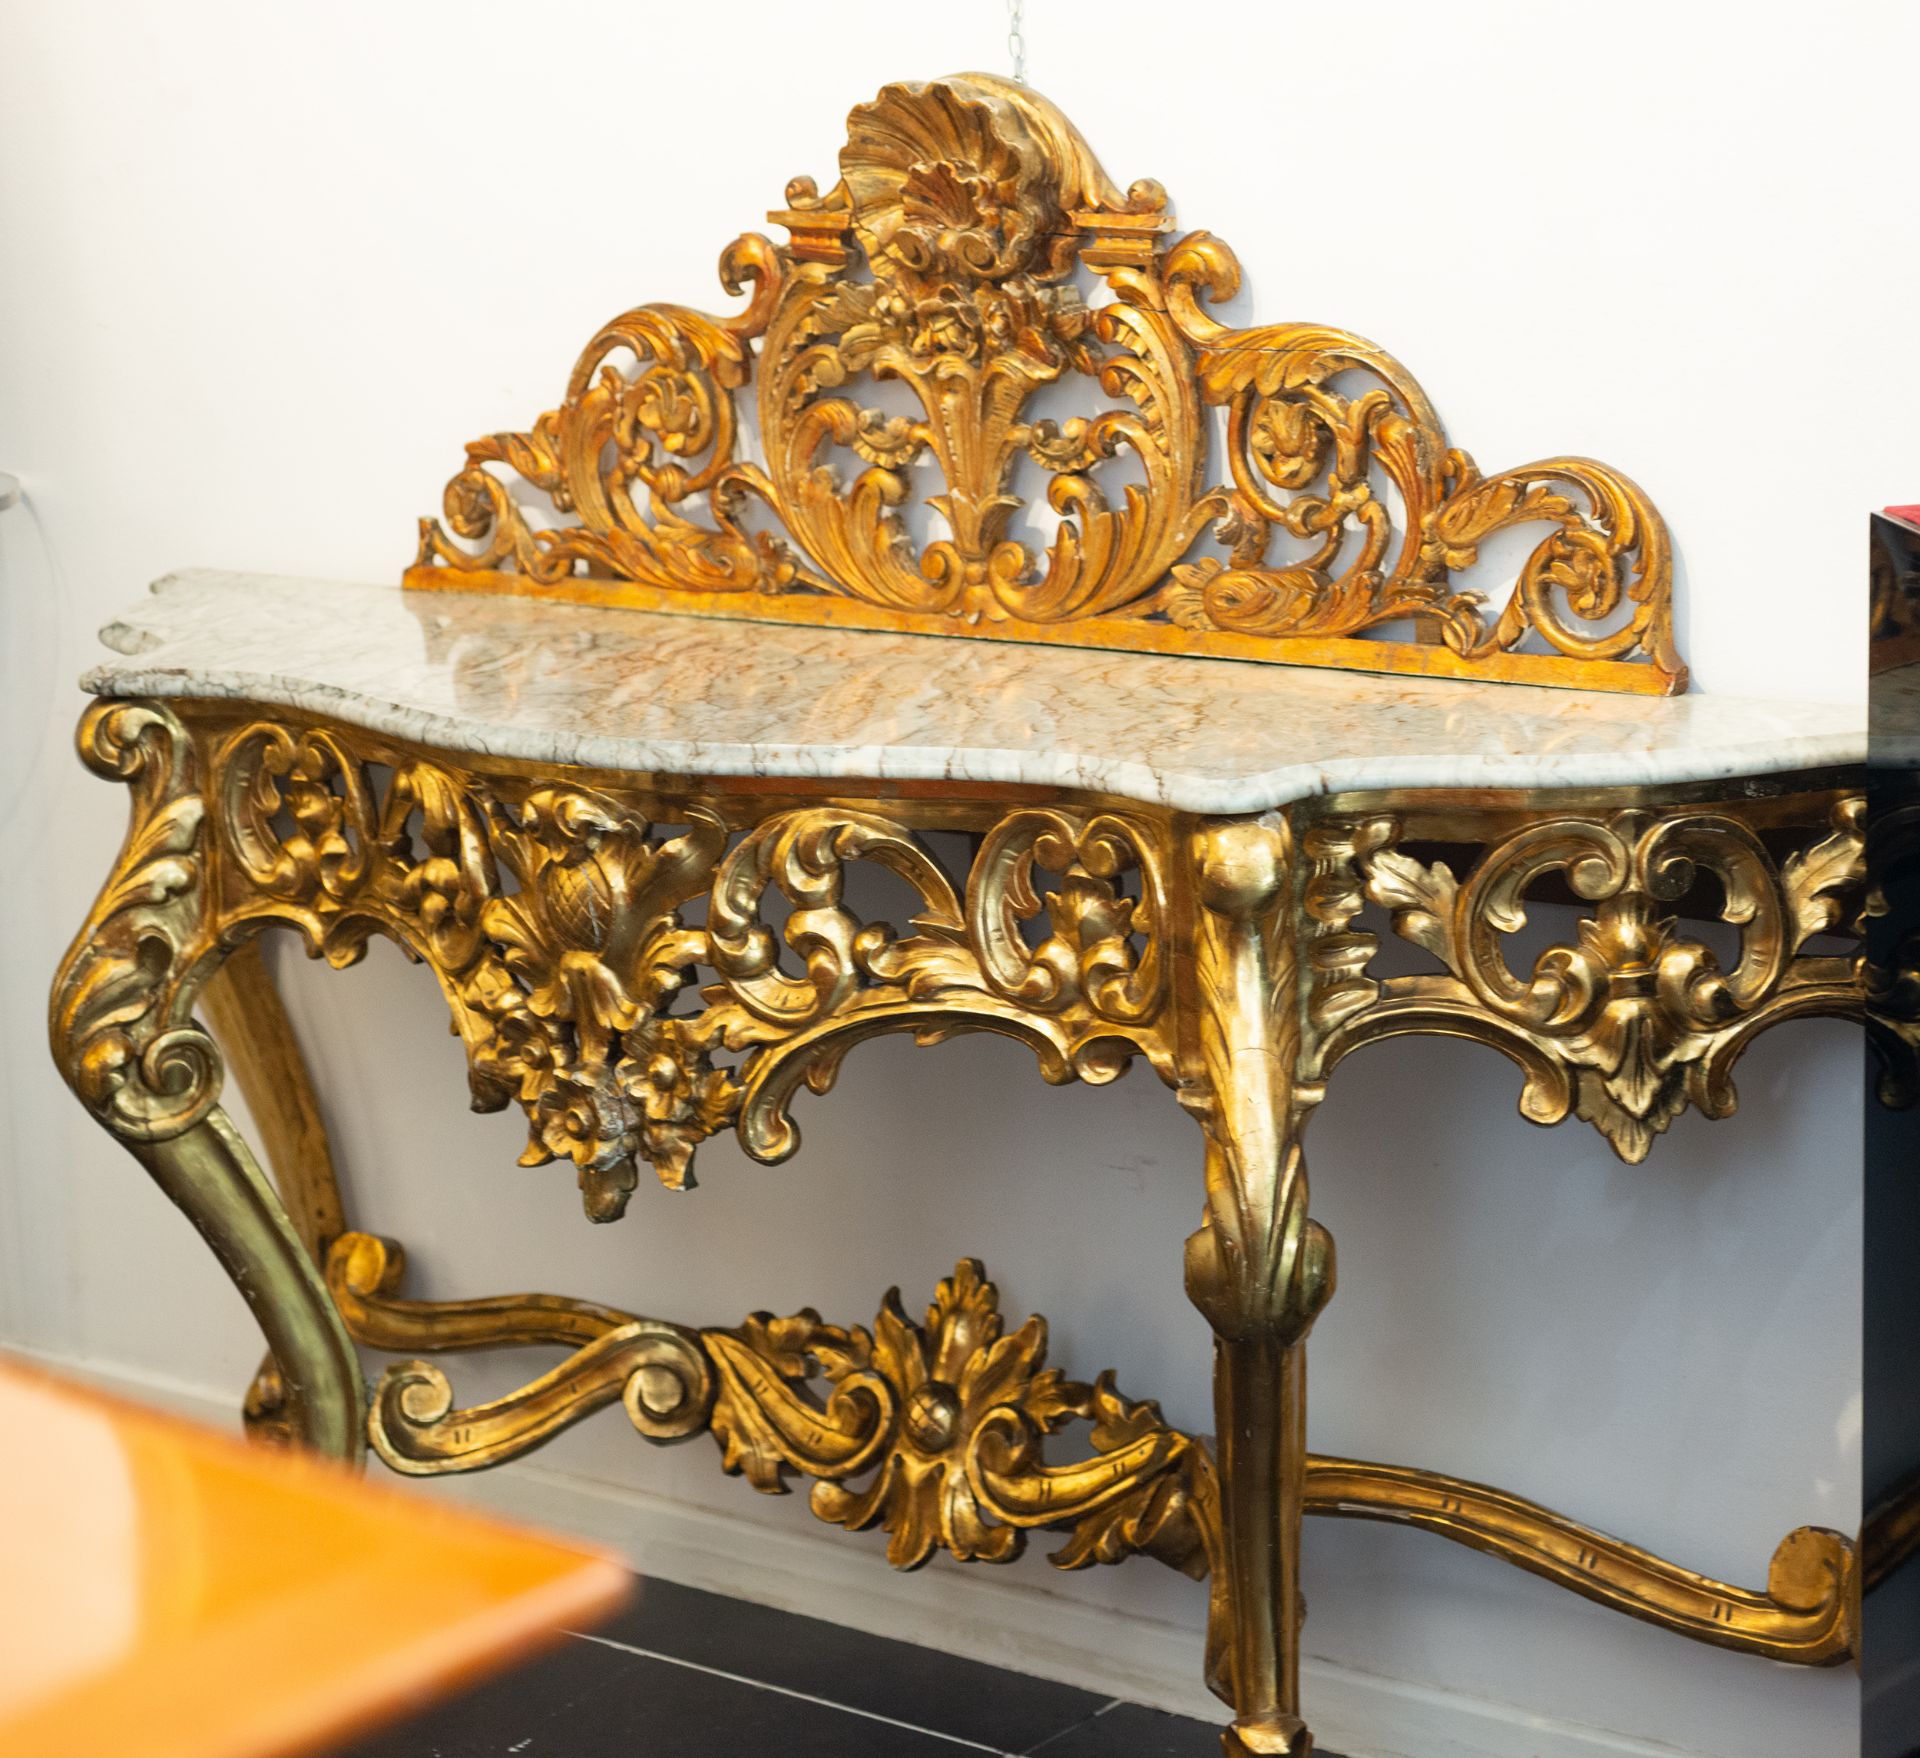 Italian console in gilt wood with gold leaf, Italian school of the 19th century - Image 2 of 7